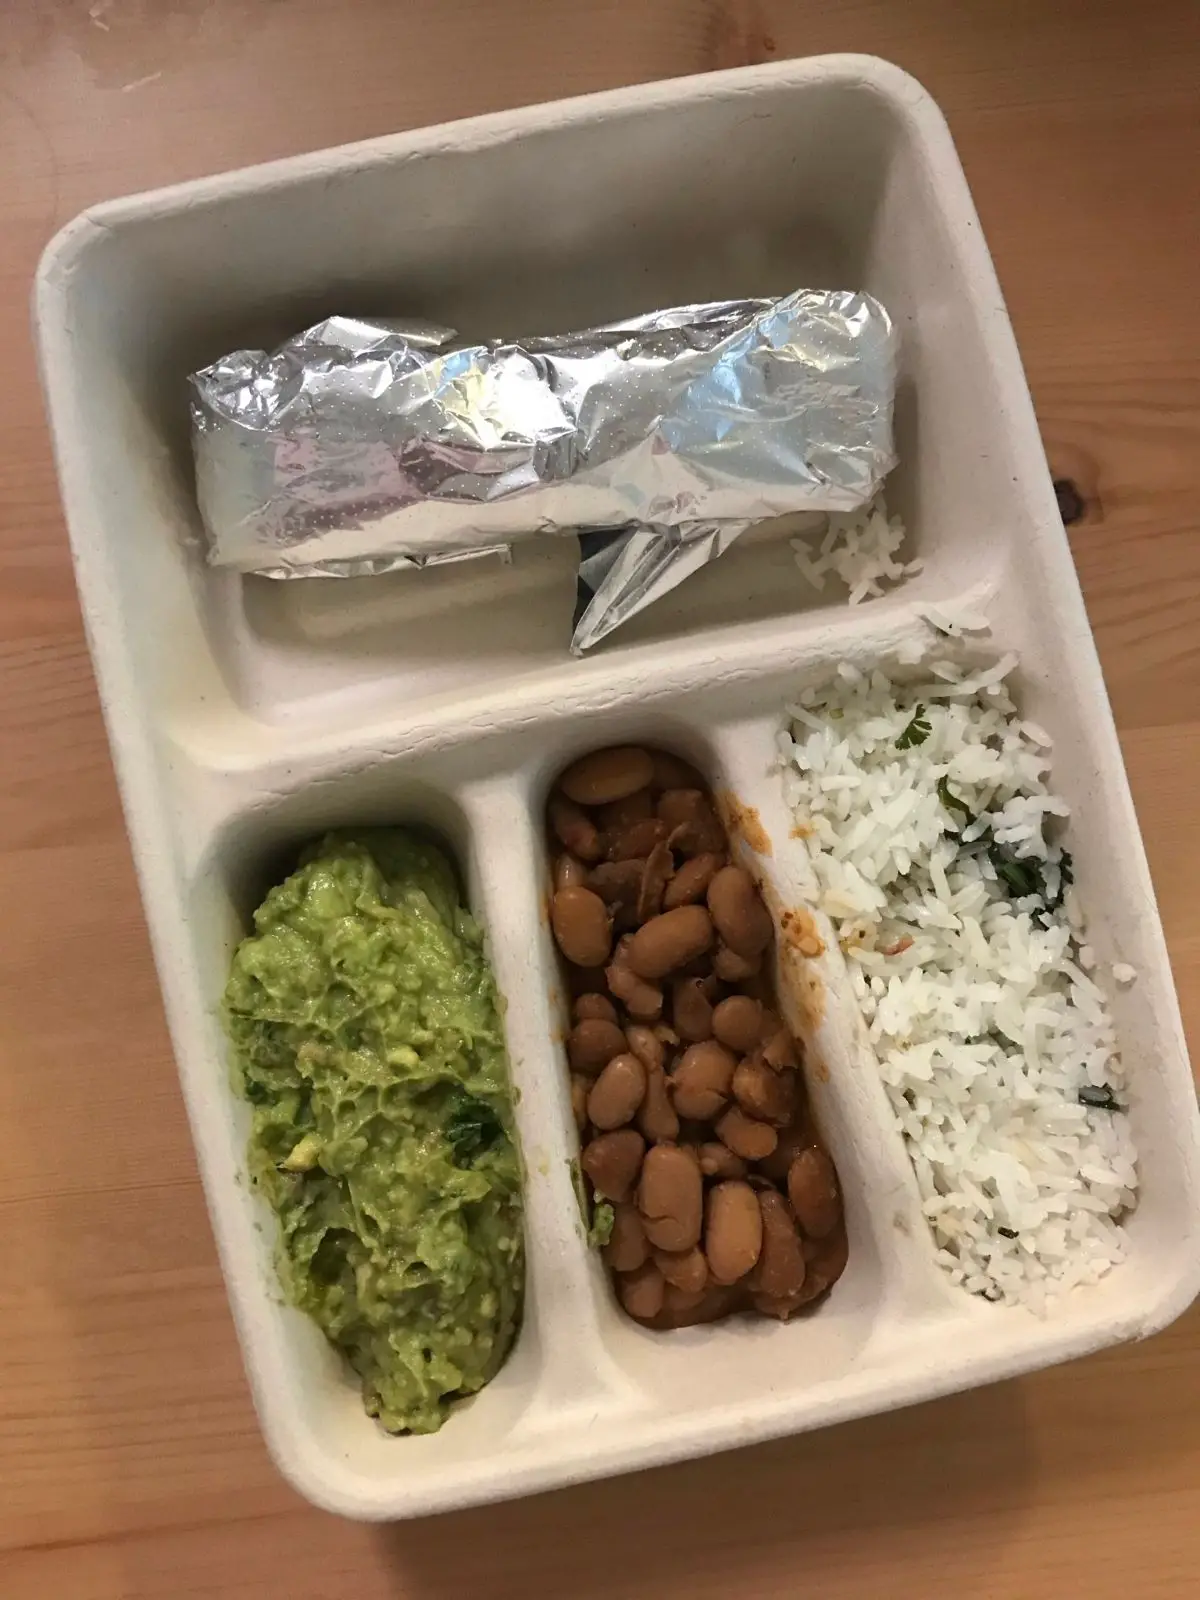 vegan kids meal from chipotle with a tortilla in foil, pinto beans, white rice, and guacamole on a wood table